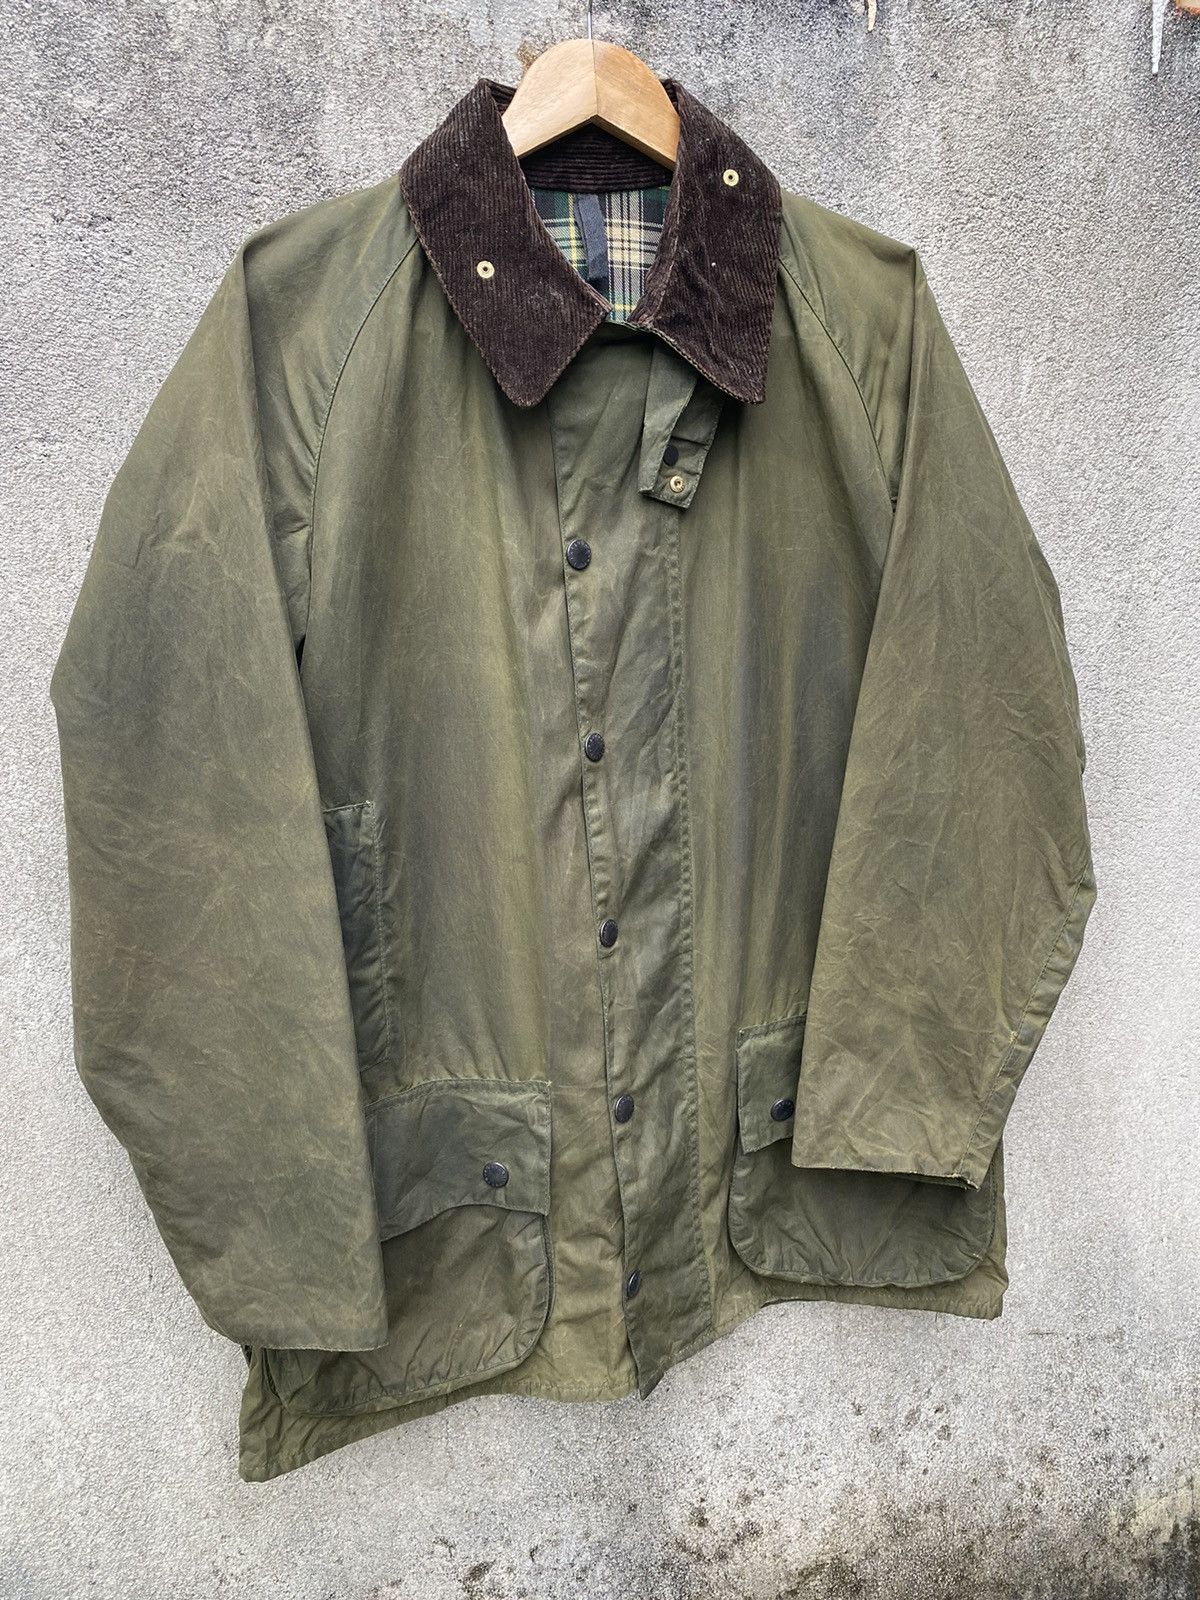 🏴󠁧󠁢󠁥󠁮󠁧󠁿 Barbour Beaufort Waxed Classic Jacket Made In England - 4